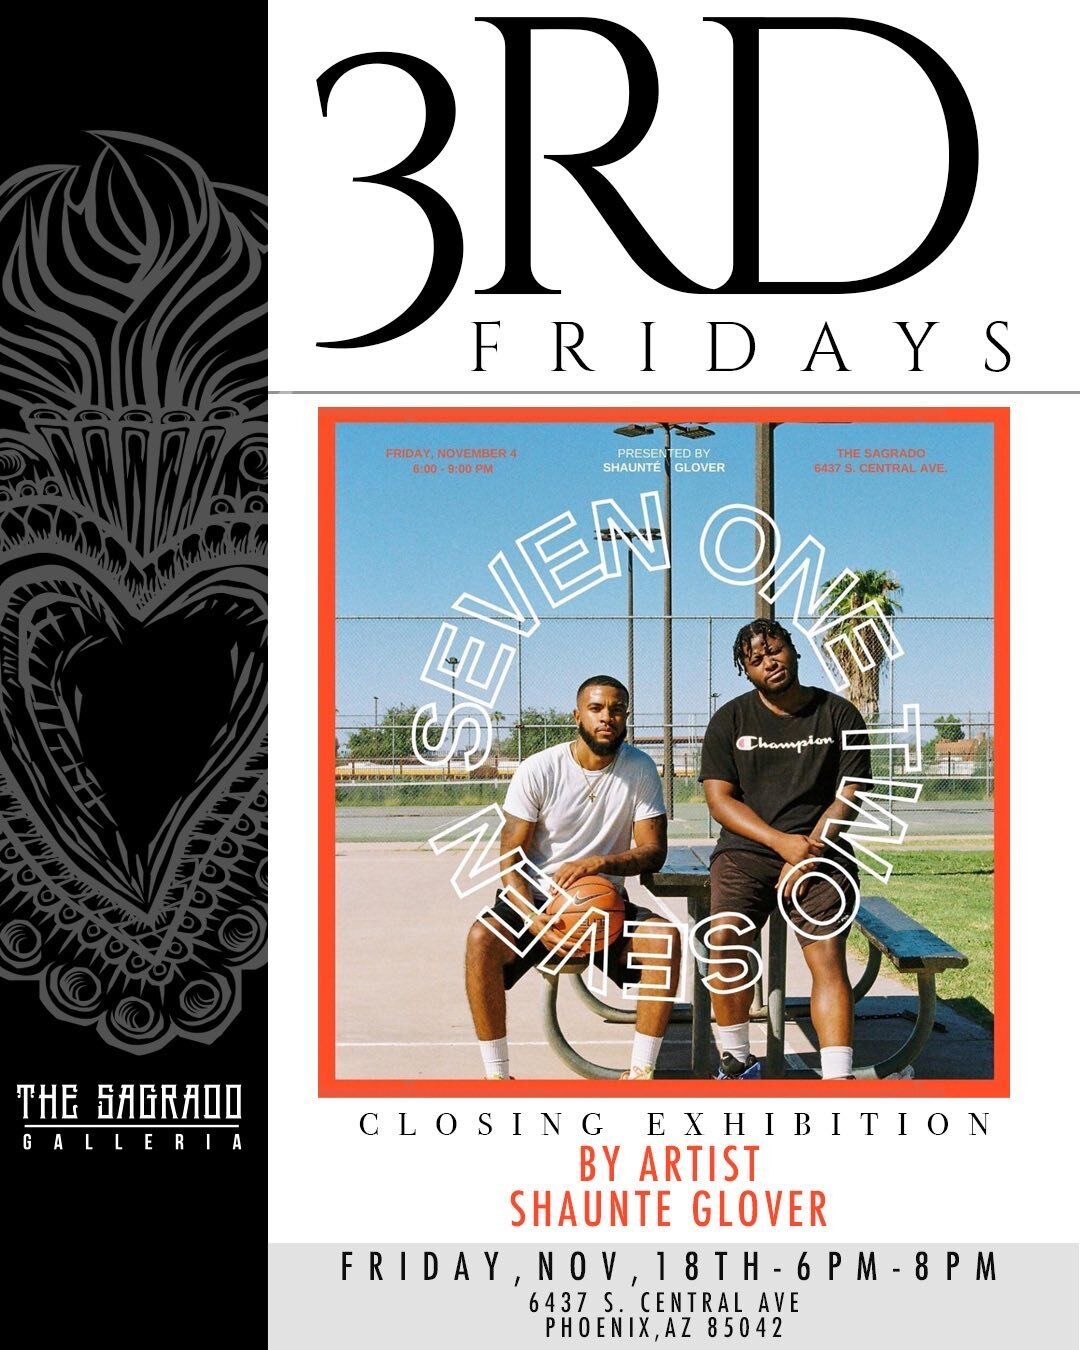 Buenos Dias ~ Join us tonight for 3rd Fridays at The Sagrado with the closing exhibition with Artist ~ @shaunte , We will have Sagrado Merch as well as Hot Teas and refreshments.  Enjoy this Beautiful Day!